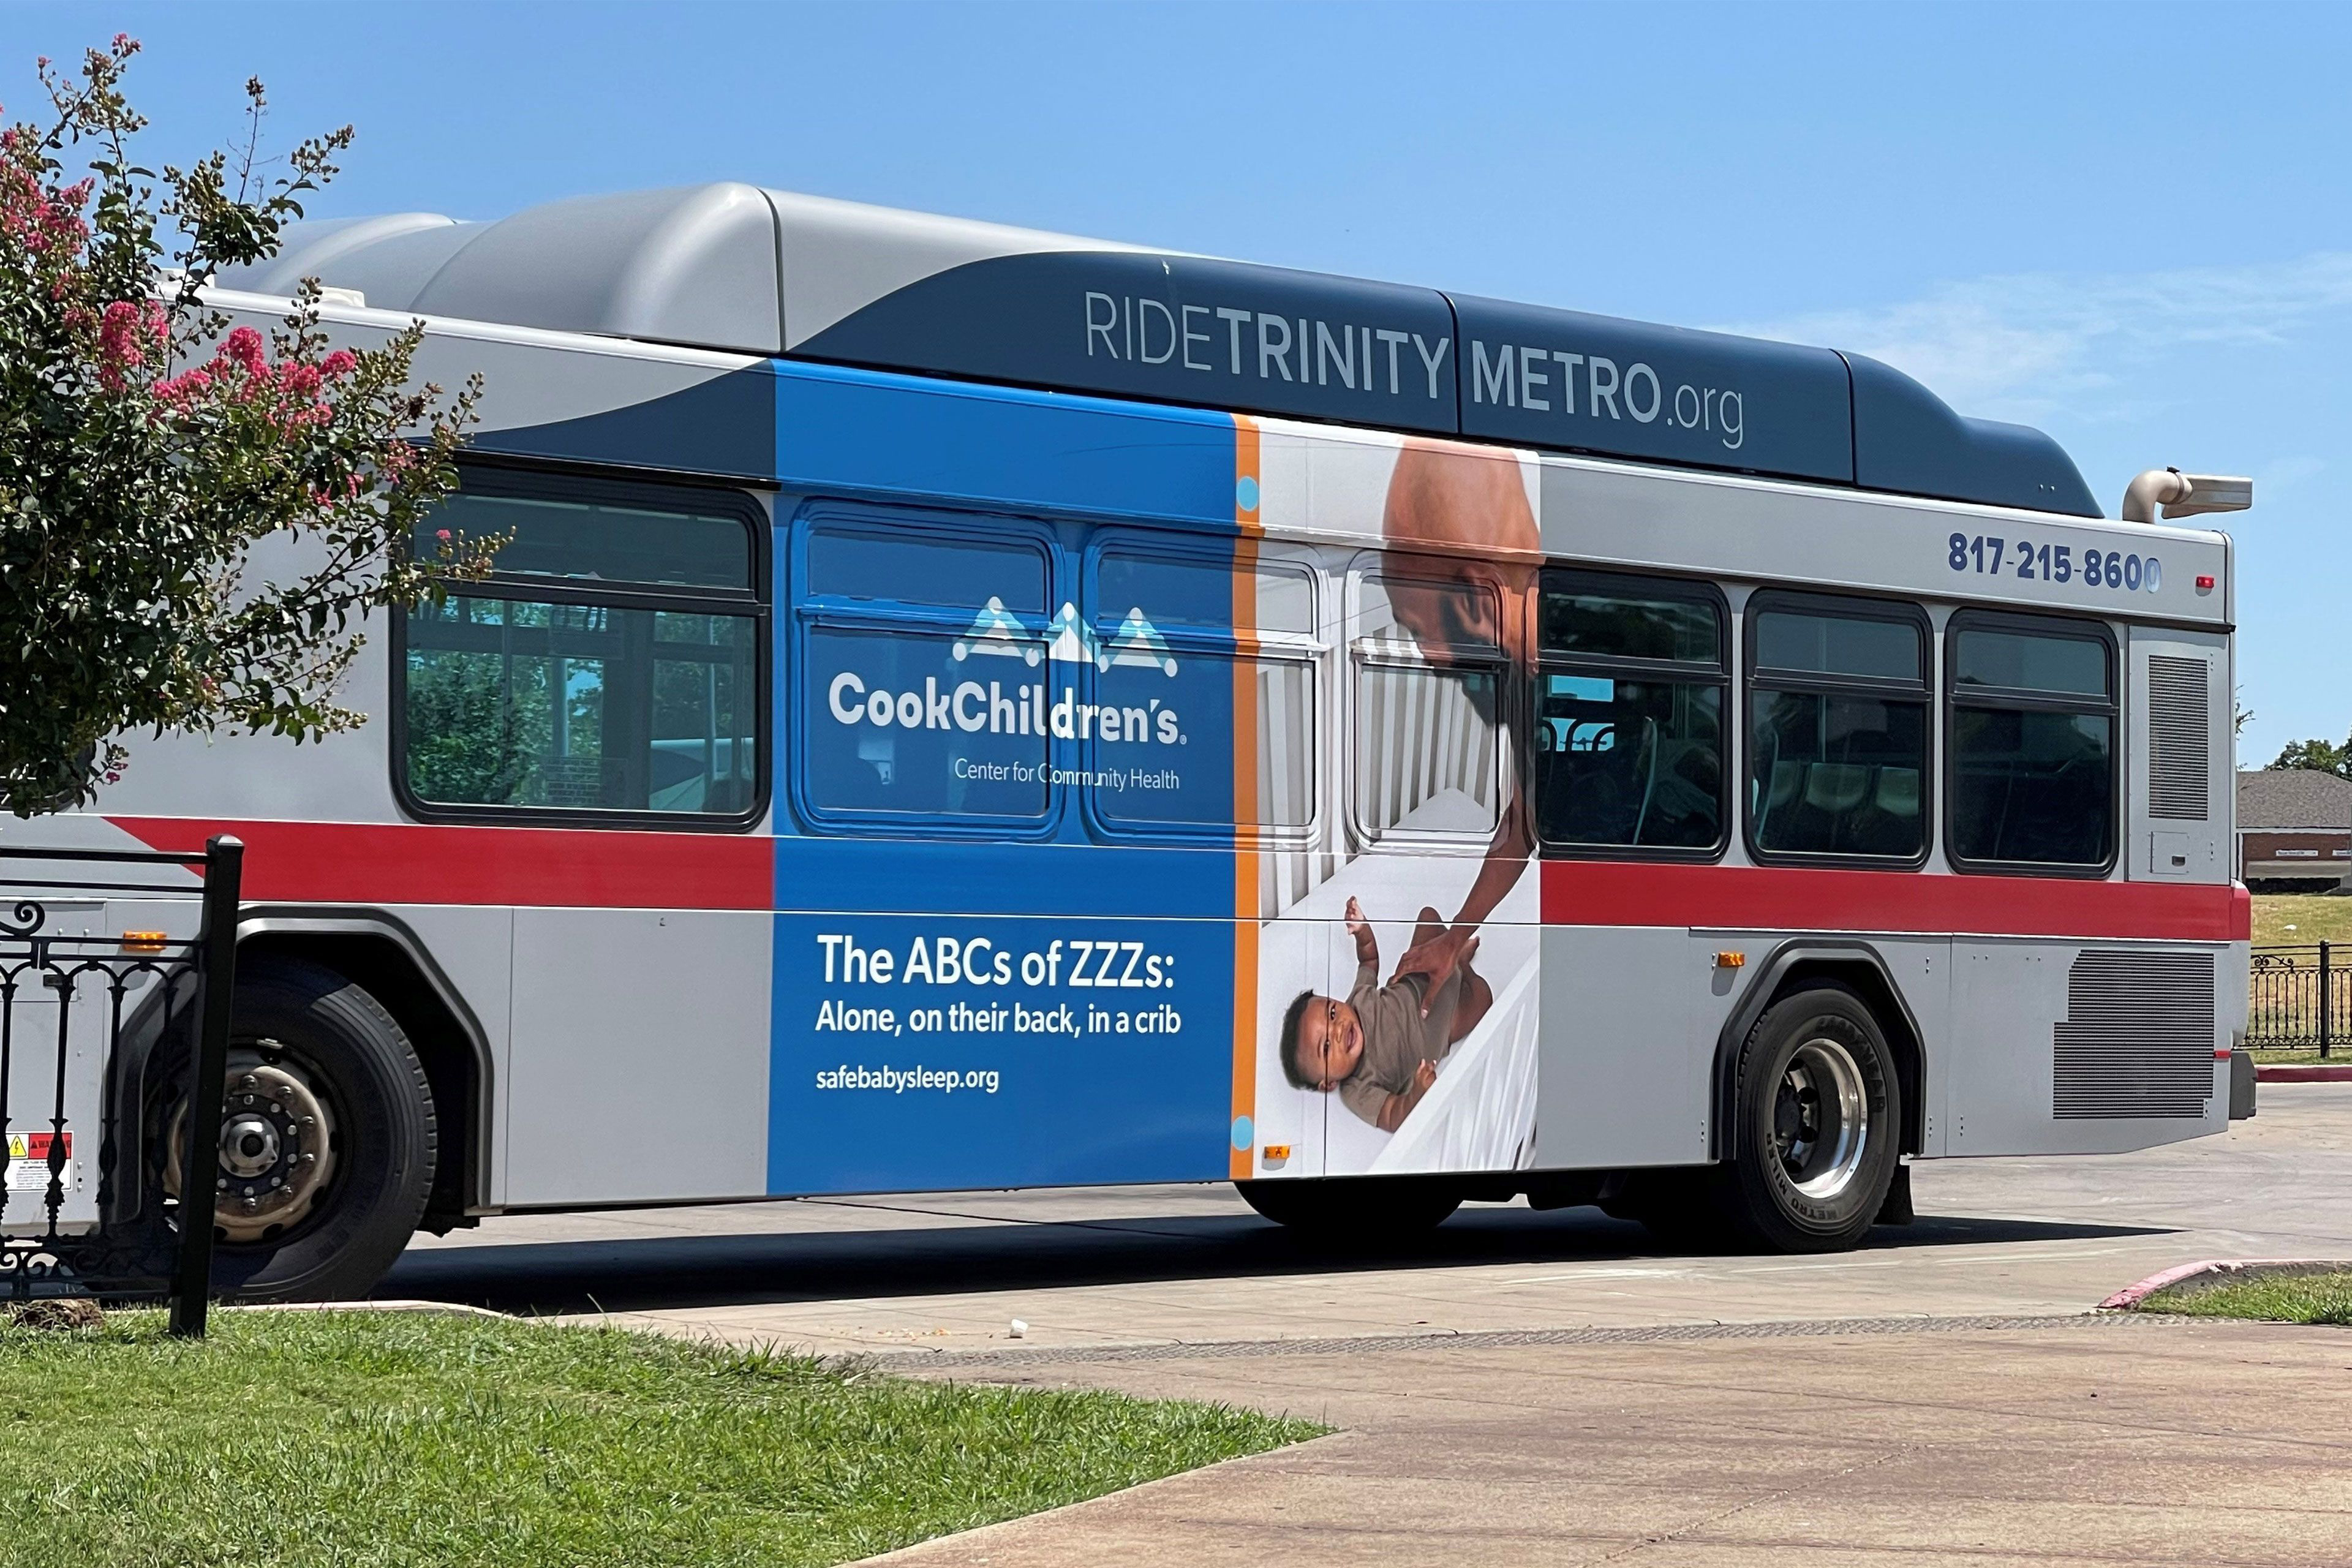 A photo of a bus with an advertisement about with safe infant sleep practices on it.